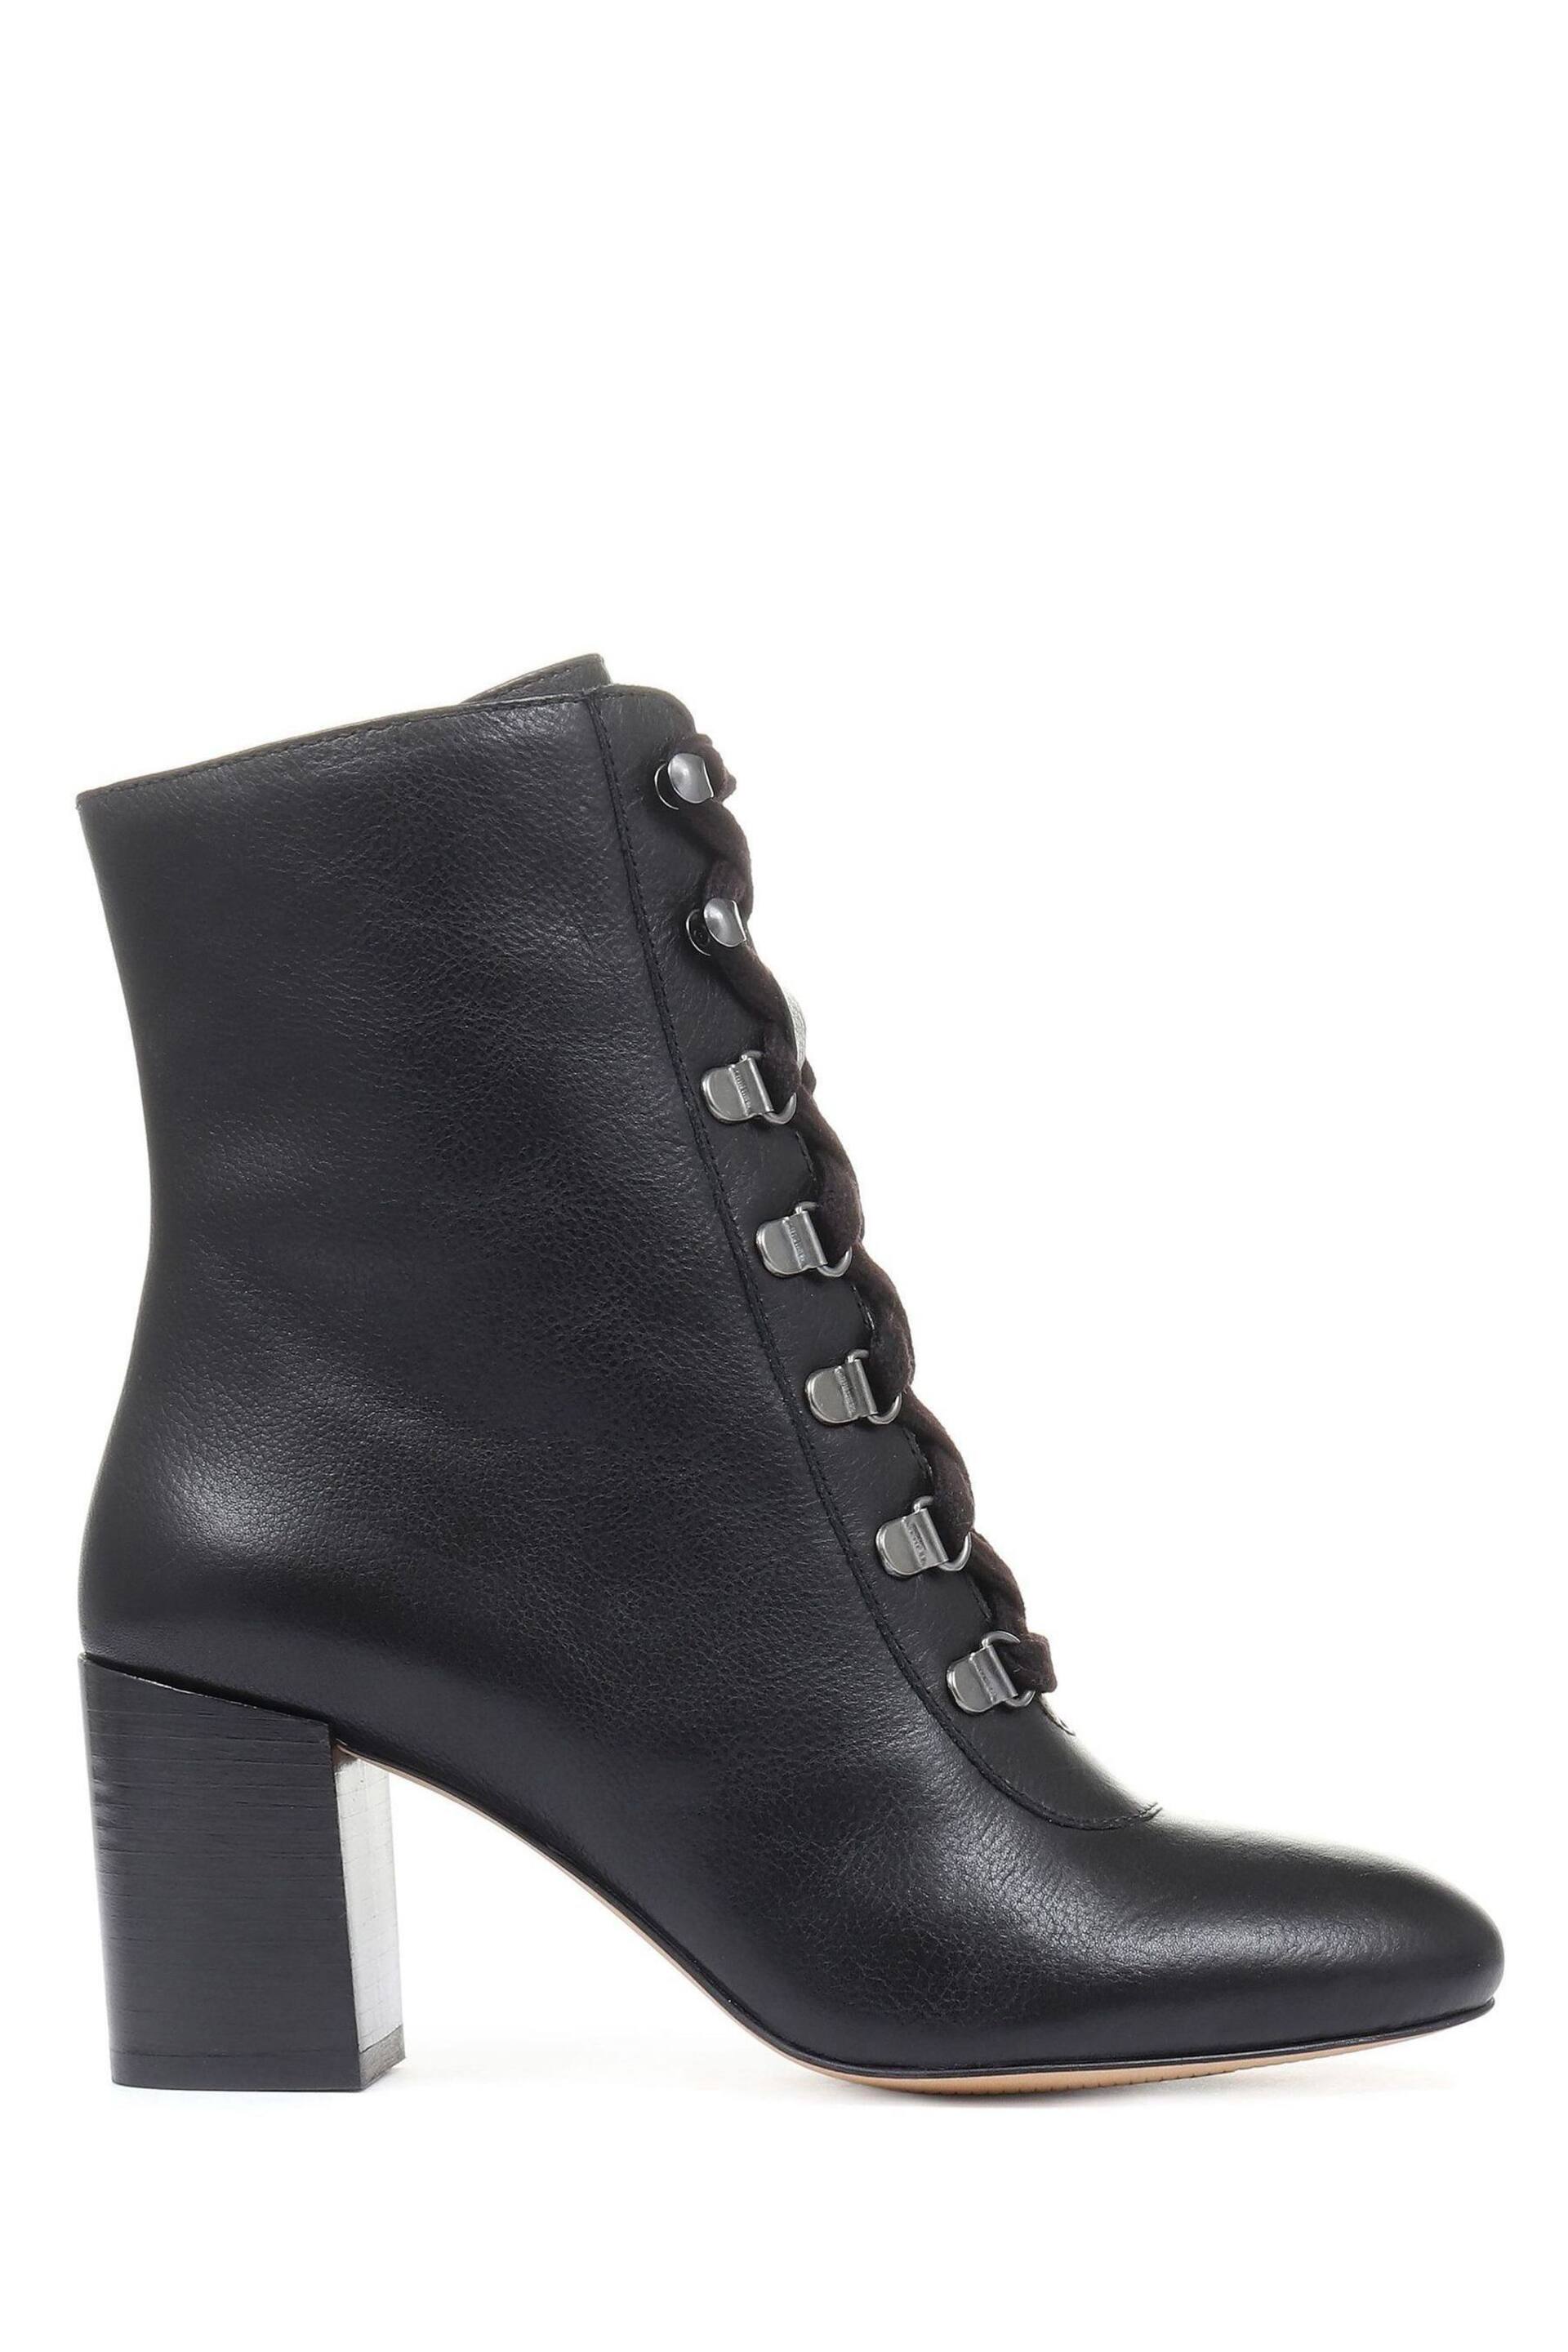 Jones Bootmaker Liana Lace-Up Heeled Ladies Ankle Boots - Image 2 of 6